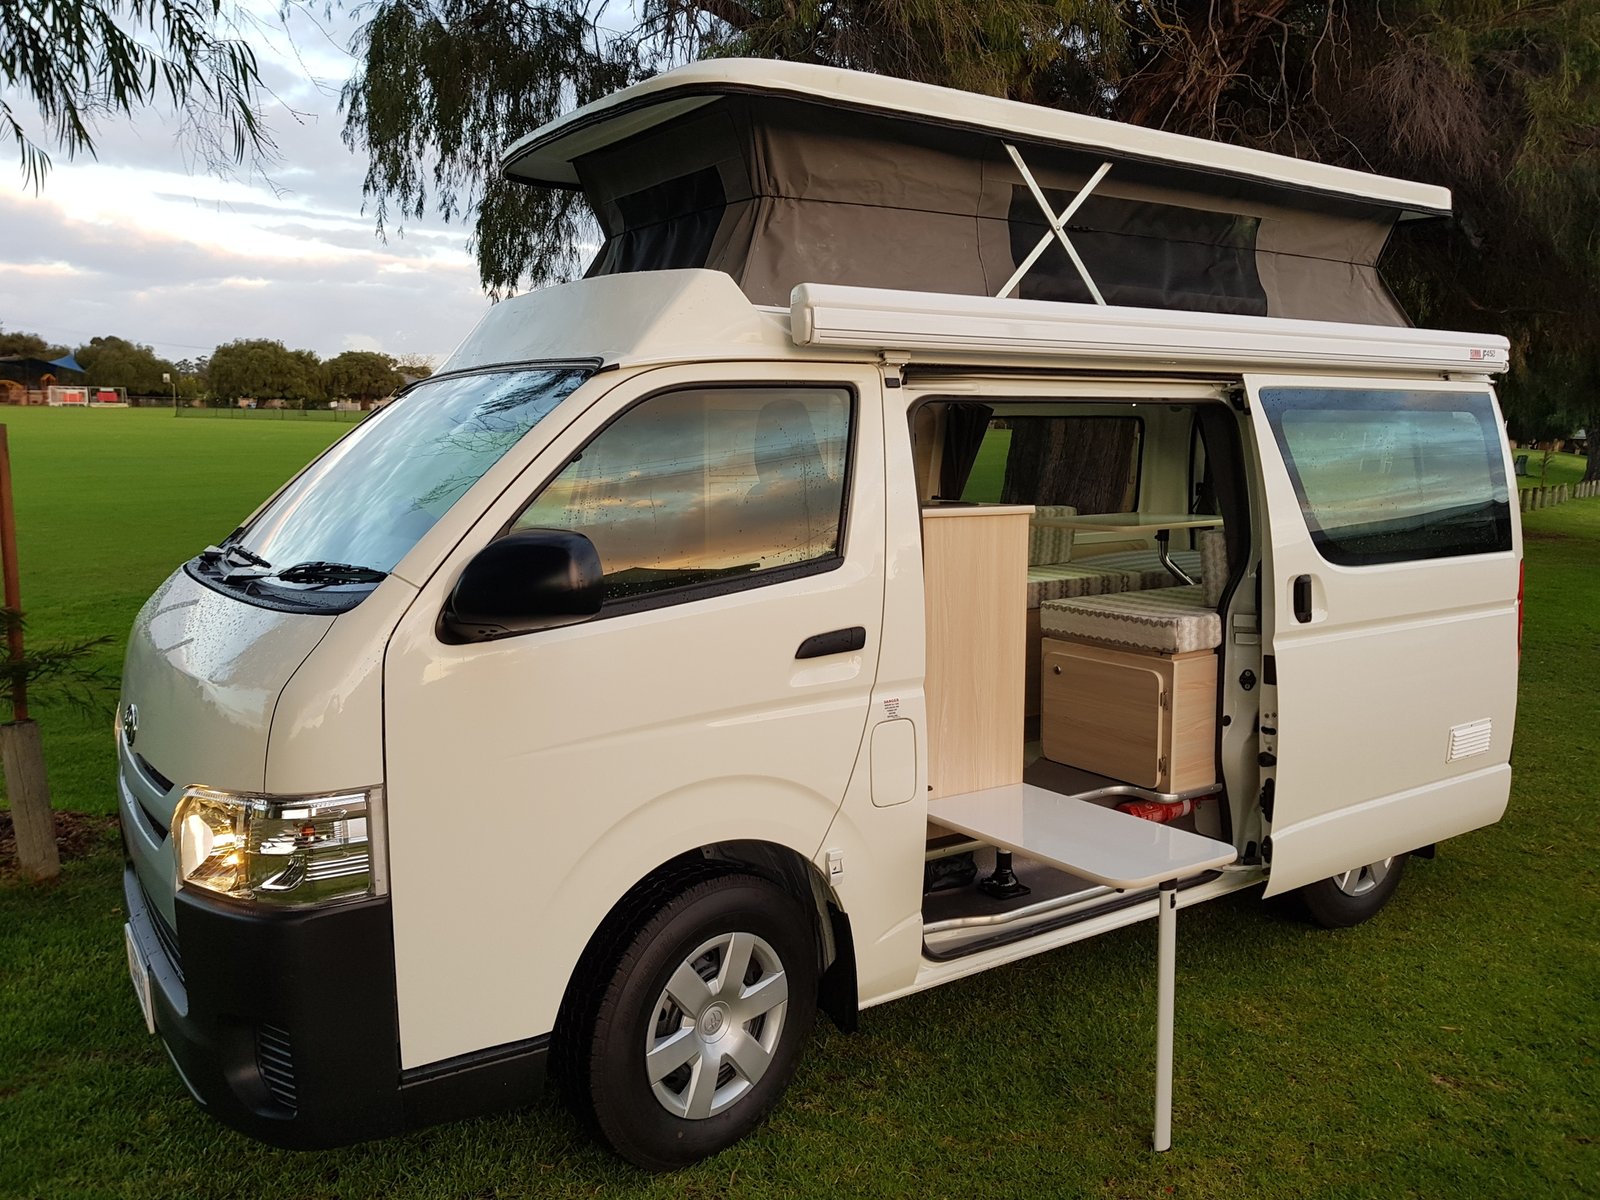 How To Look For The Best Campervan Conversions Professionals? - Ryker Beck